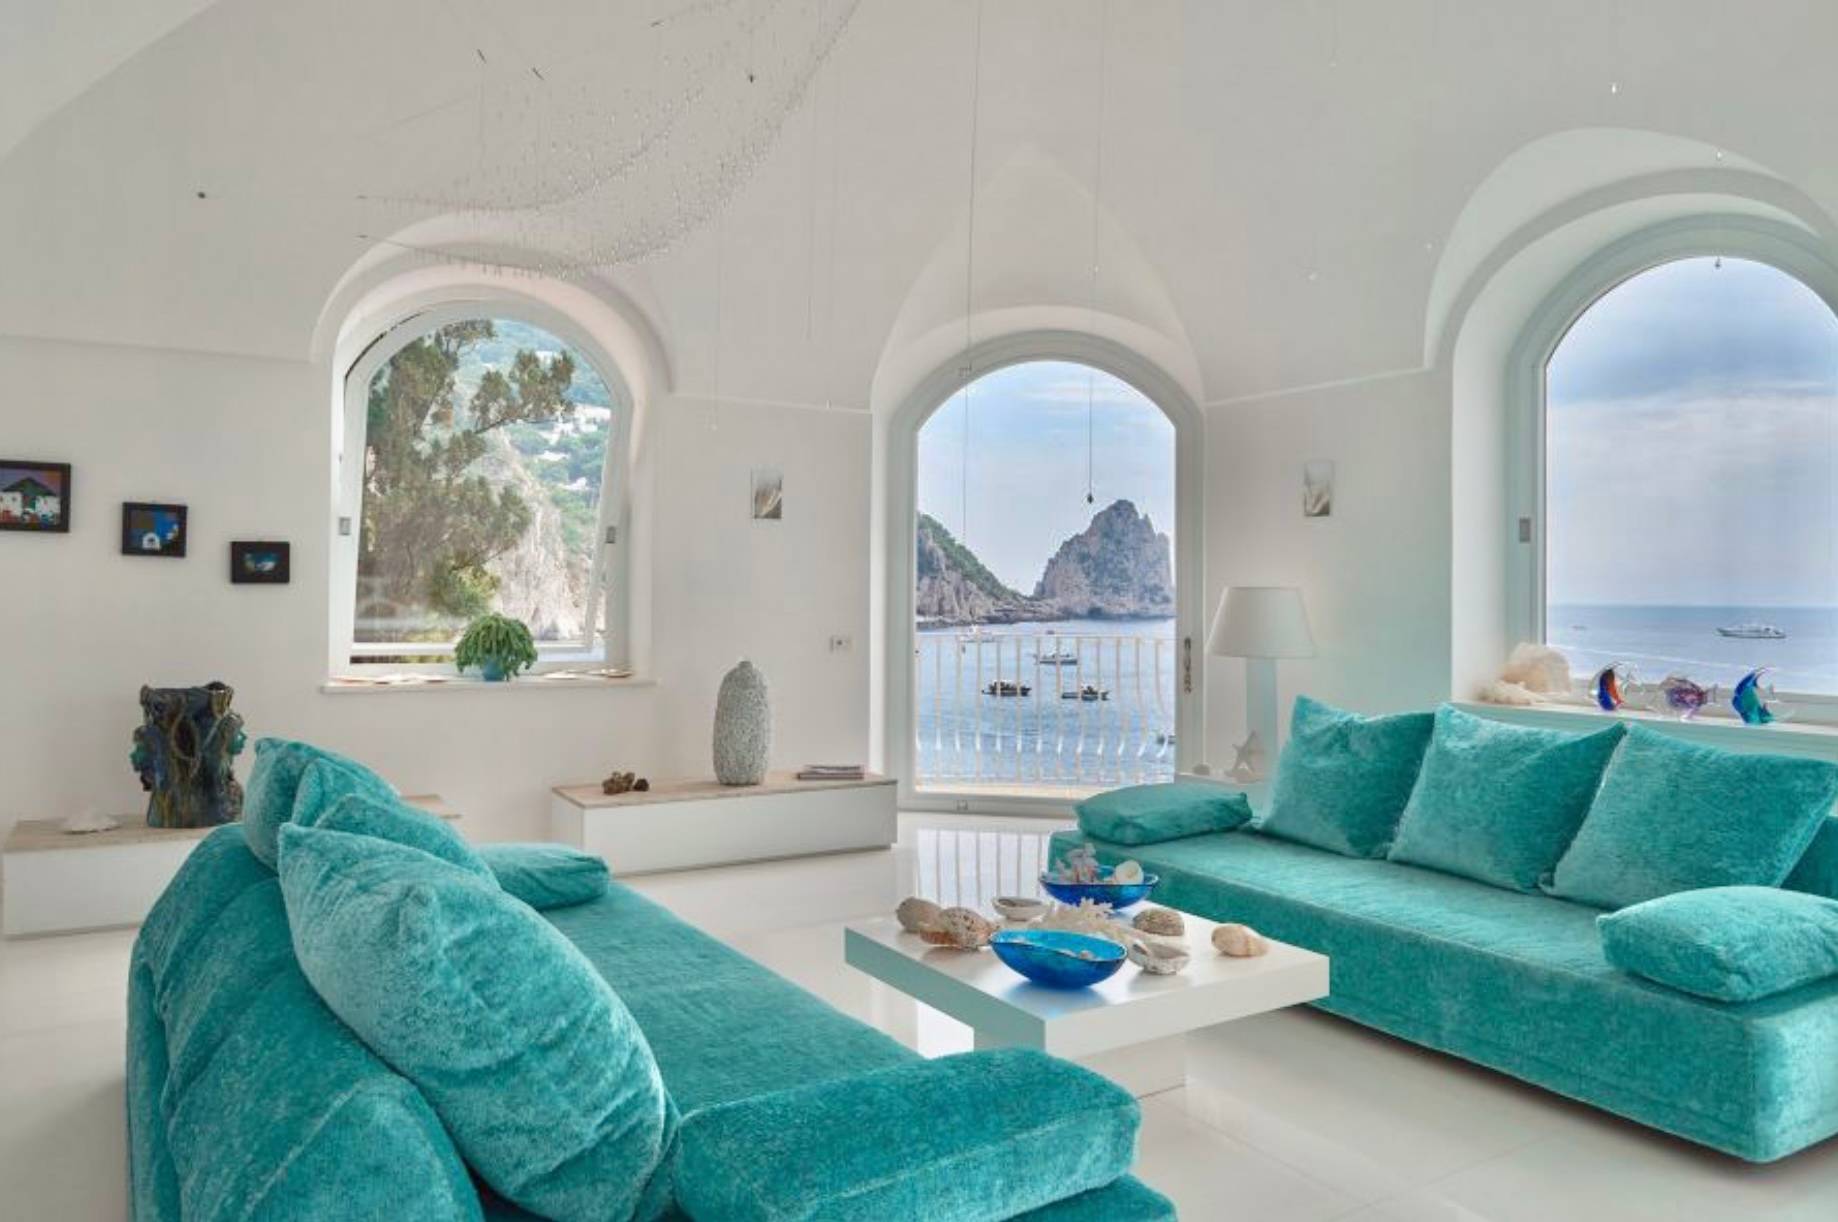 Experience exclusivity in Capri with Villa Torre Saracena: the only one with private beach club and pier.